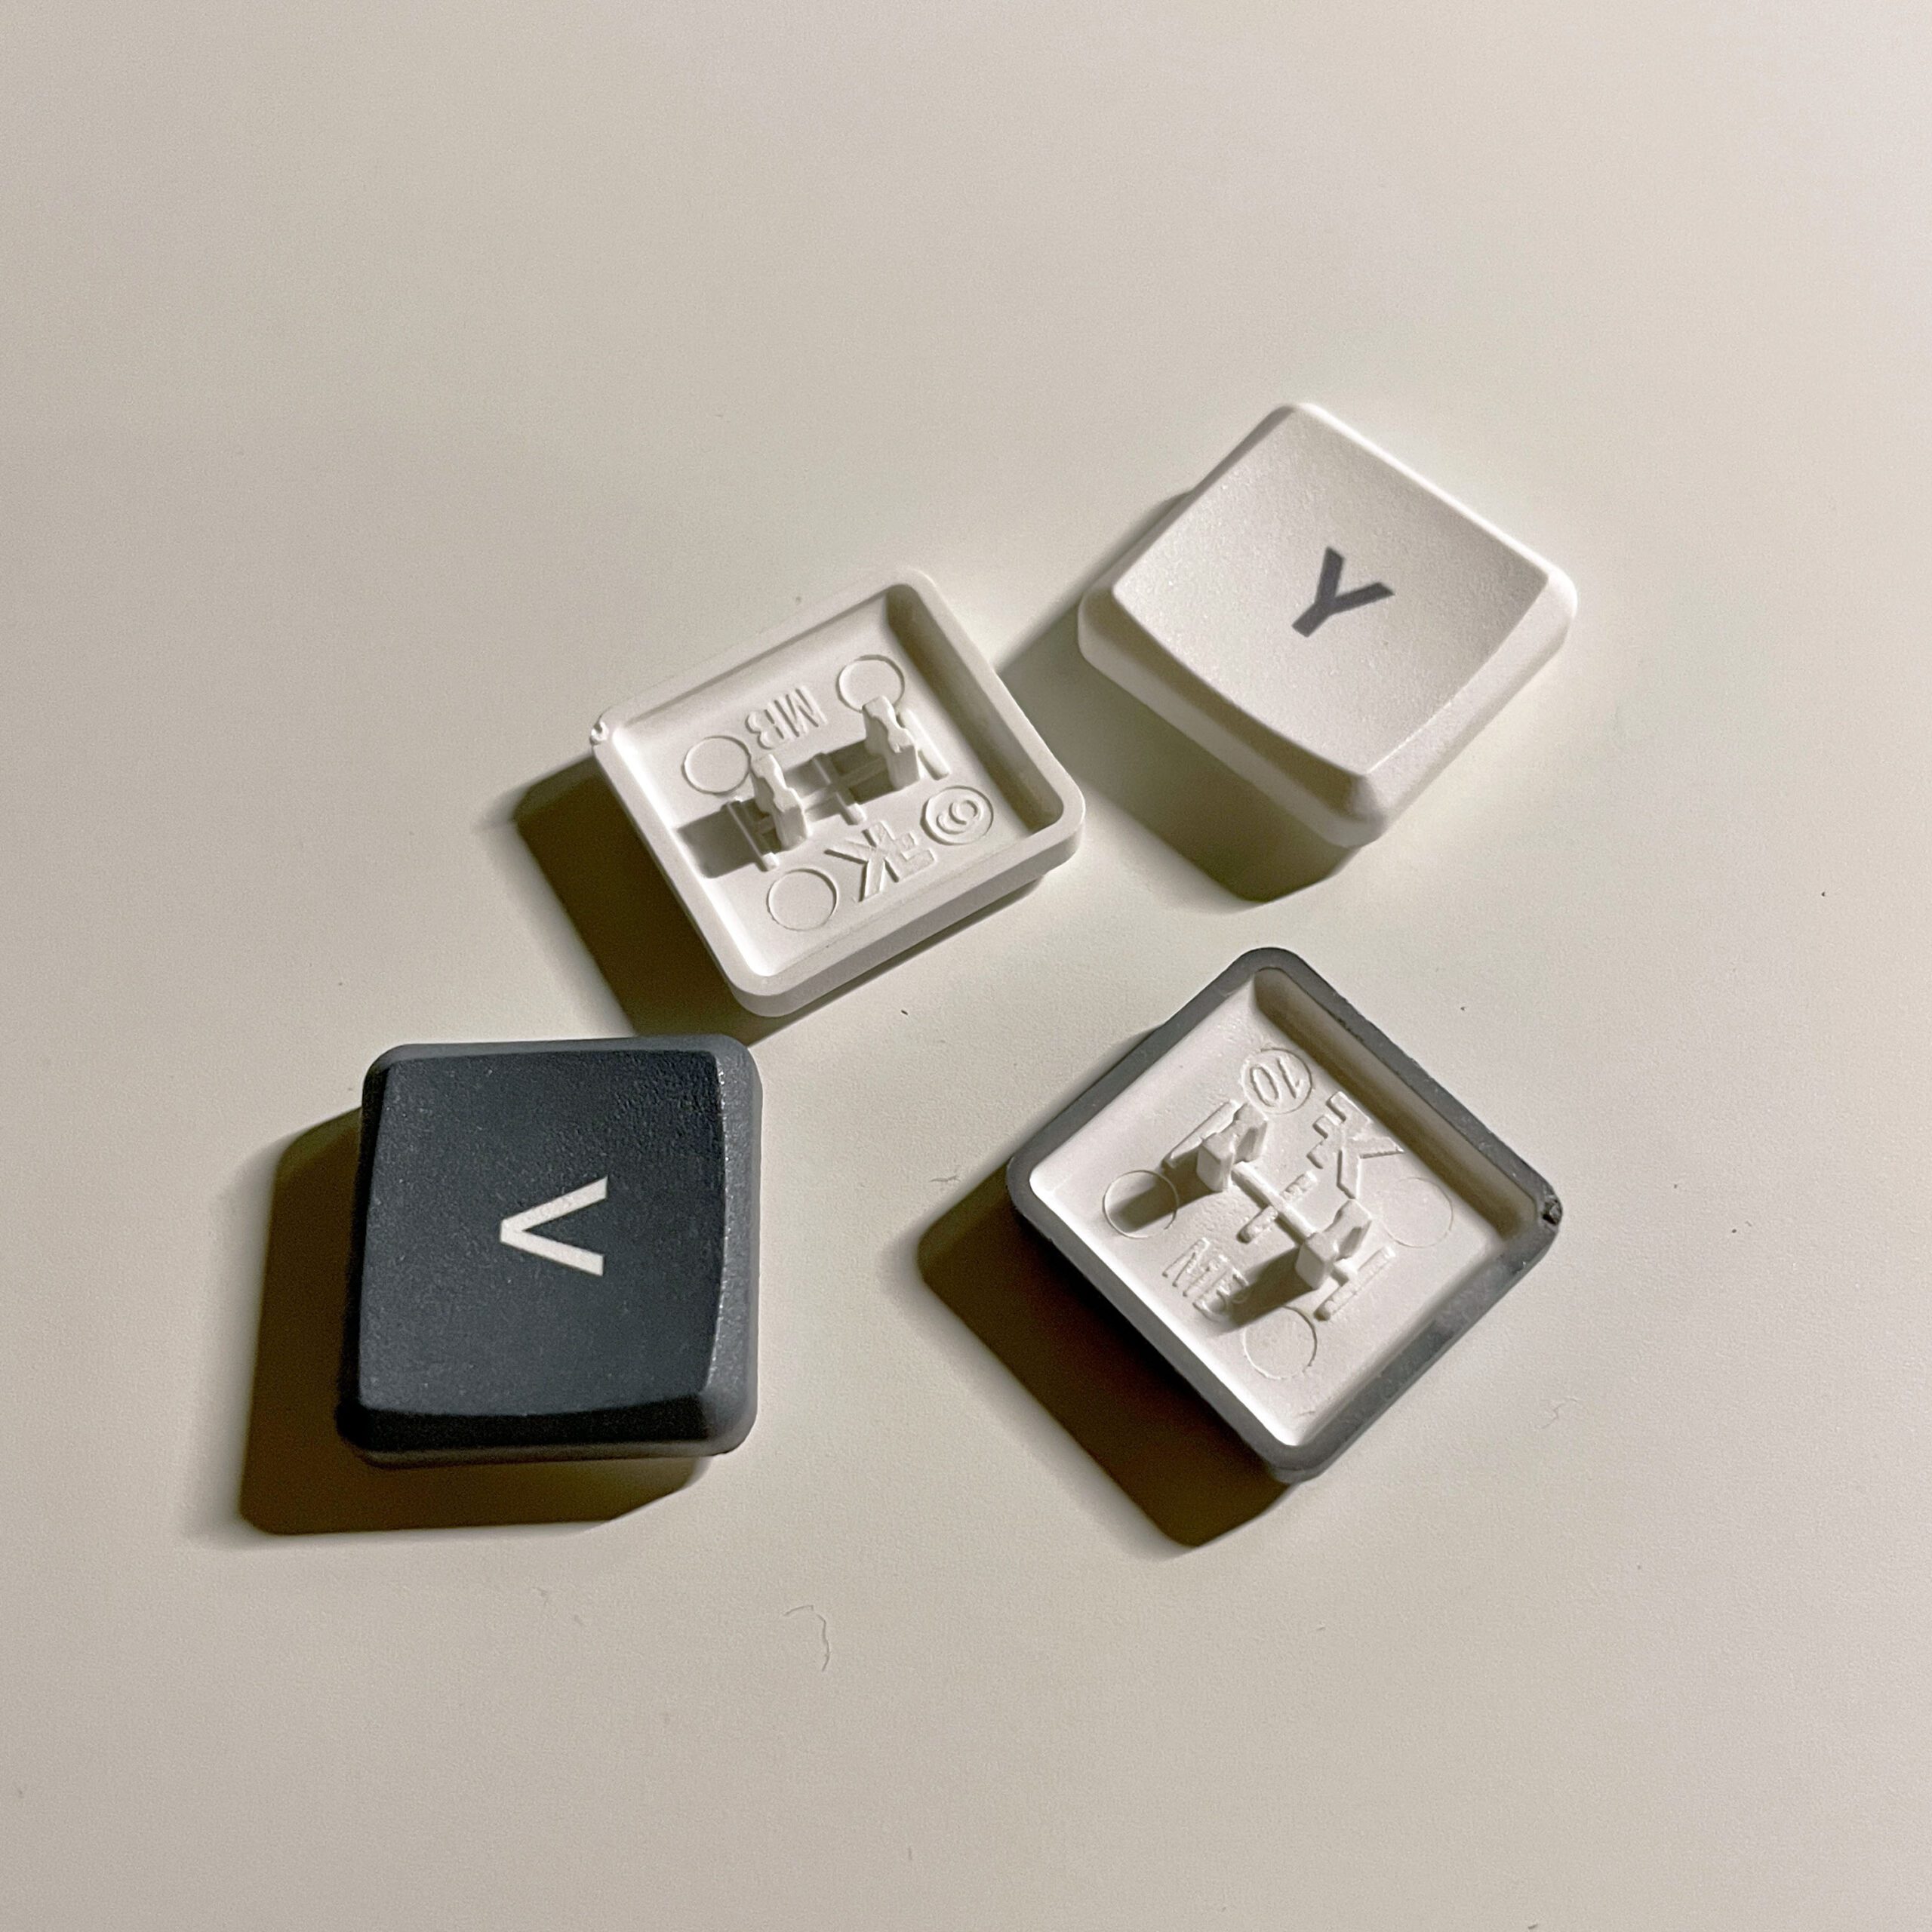 MBK Legend ‡ 40s Low Profile Choc Spacing Keycap Set with Keycap Puller